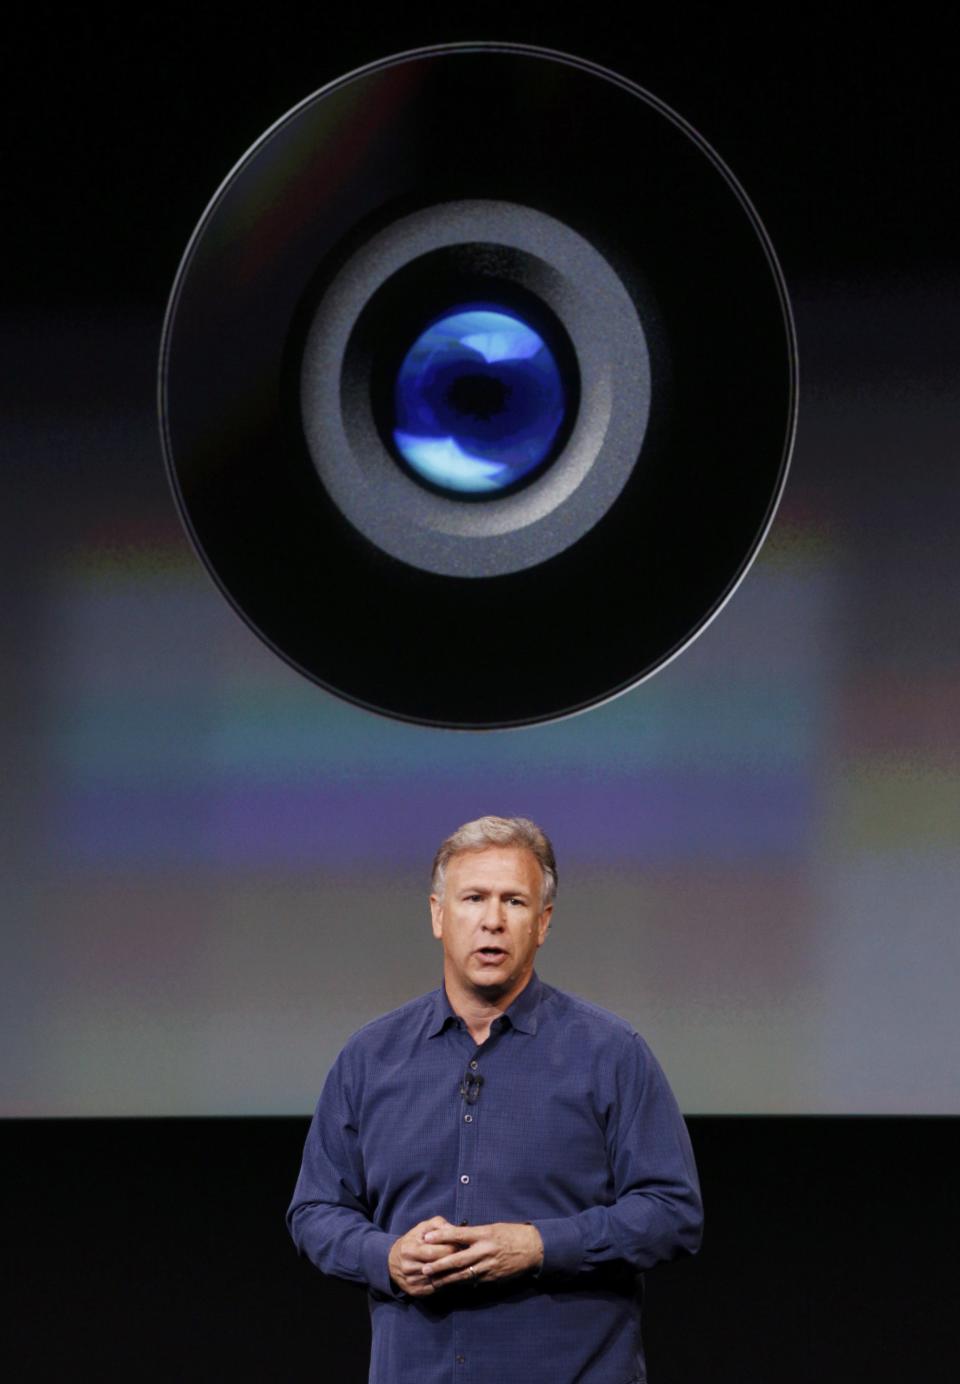 Phil Schiller, senior vice president of worldwide marketing for Apple Inc, talks about the camera in the new iPhone 5S during Apple Inc's media event in Cupertino